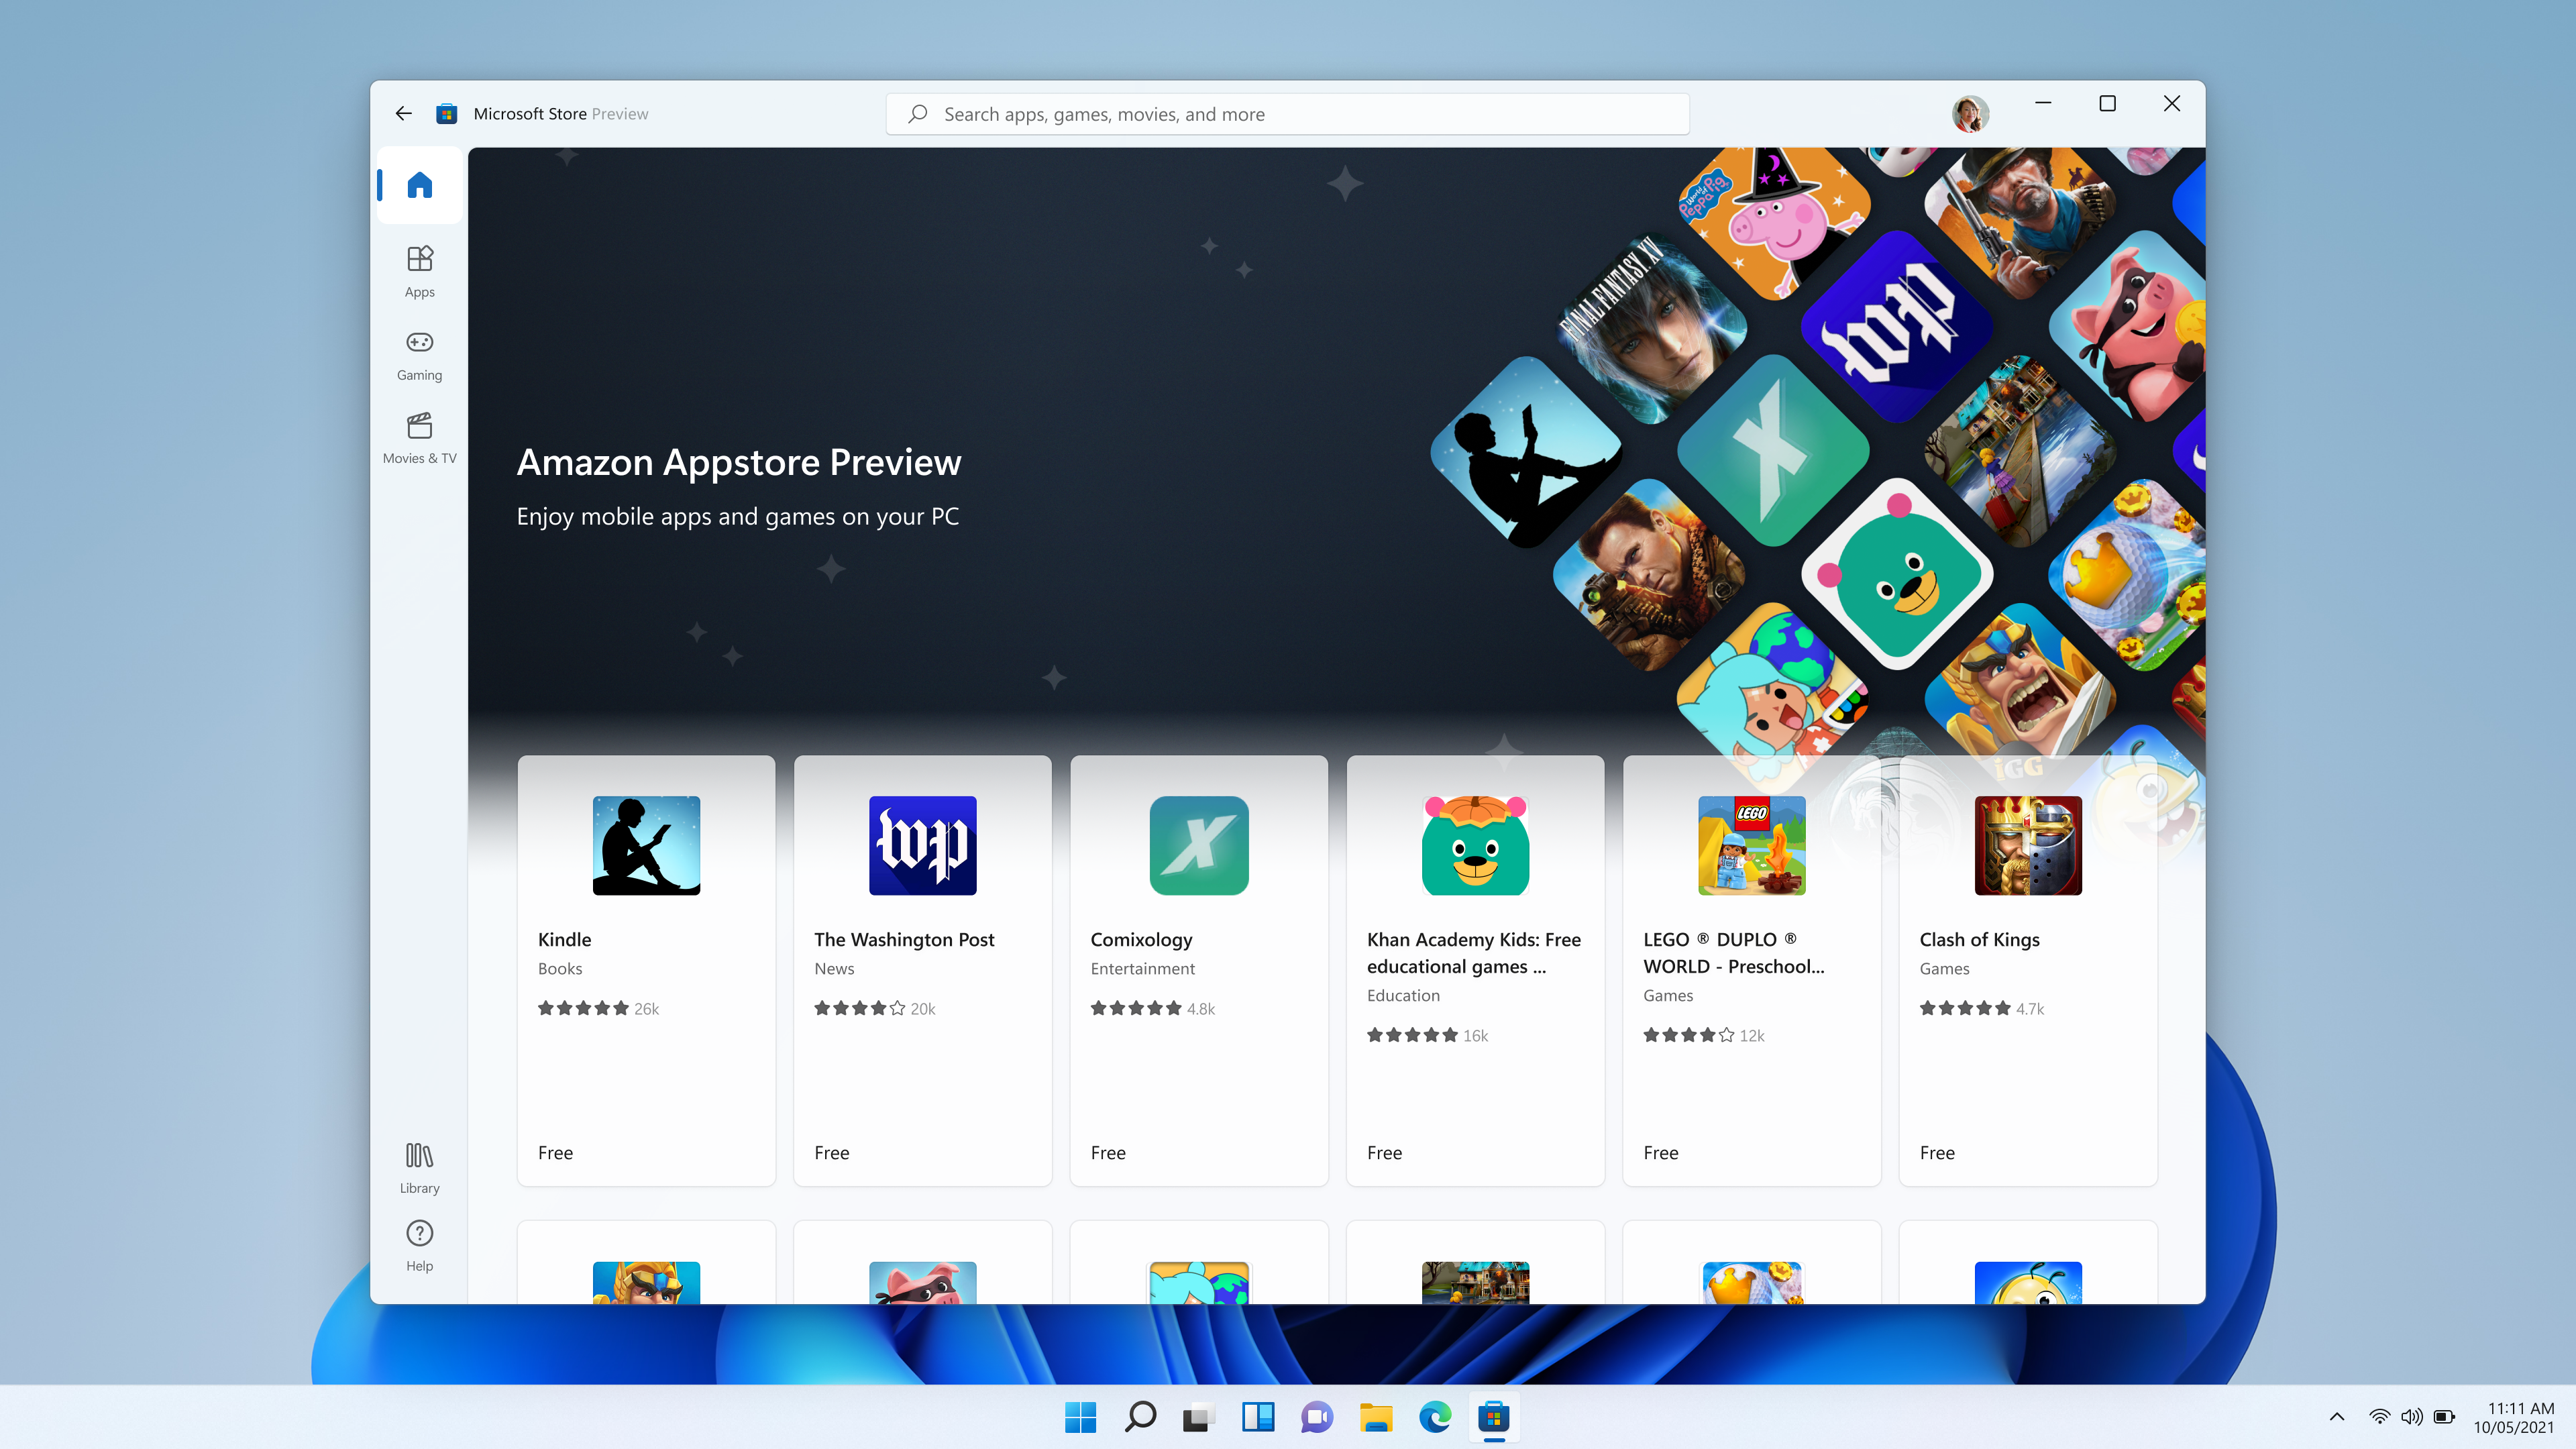 Home page of Store spotlighting Amazon Appstore.